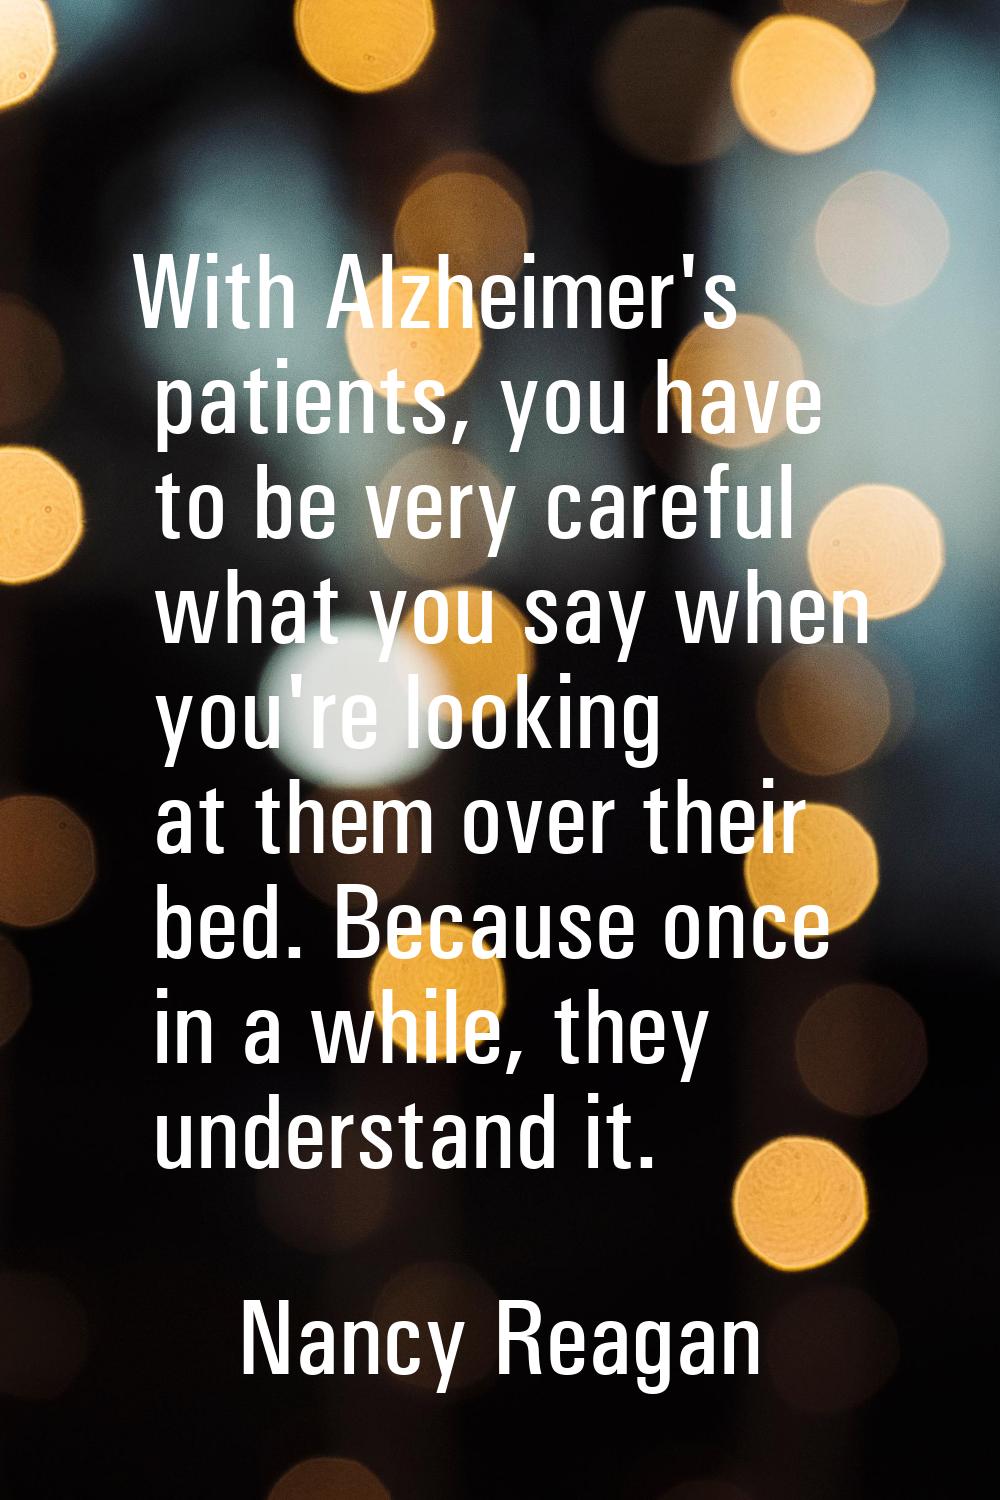 With Alzheimer's patients, you have to be very careful what you say when you're looking at them ove